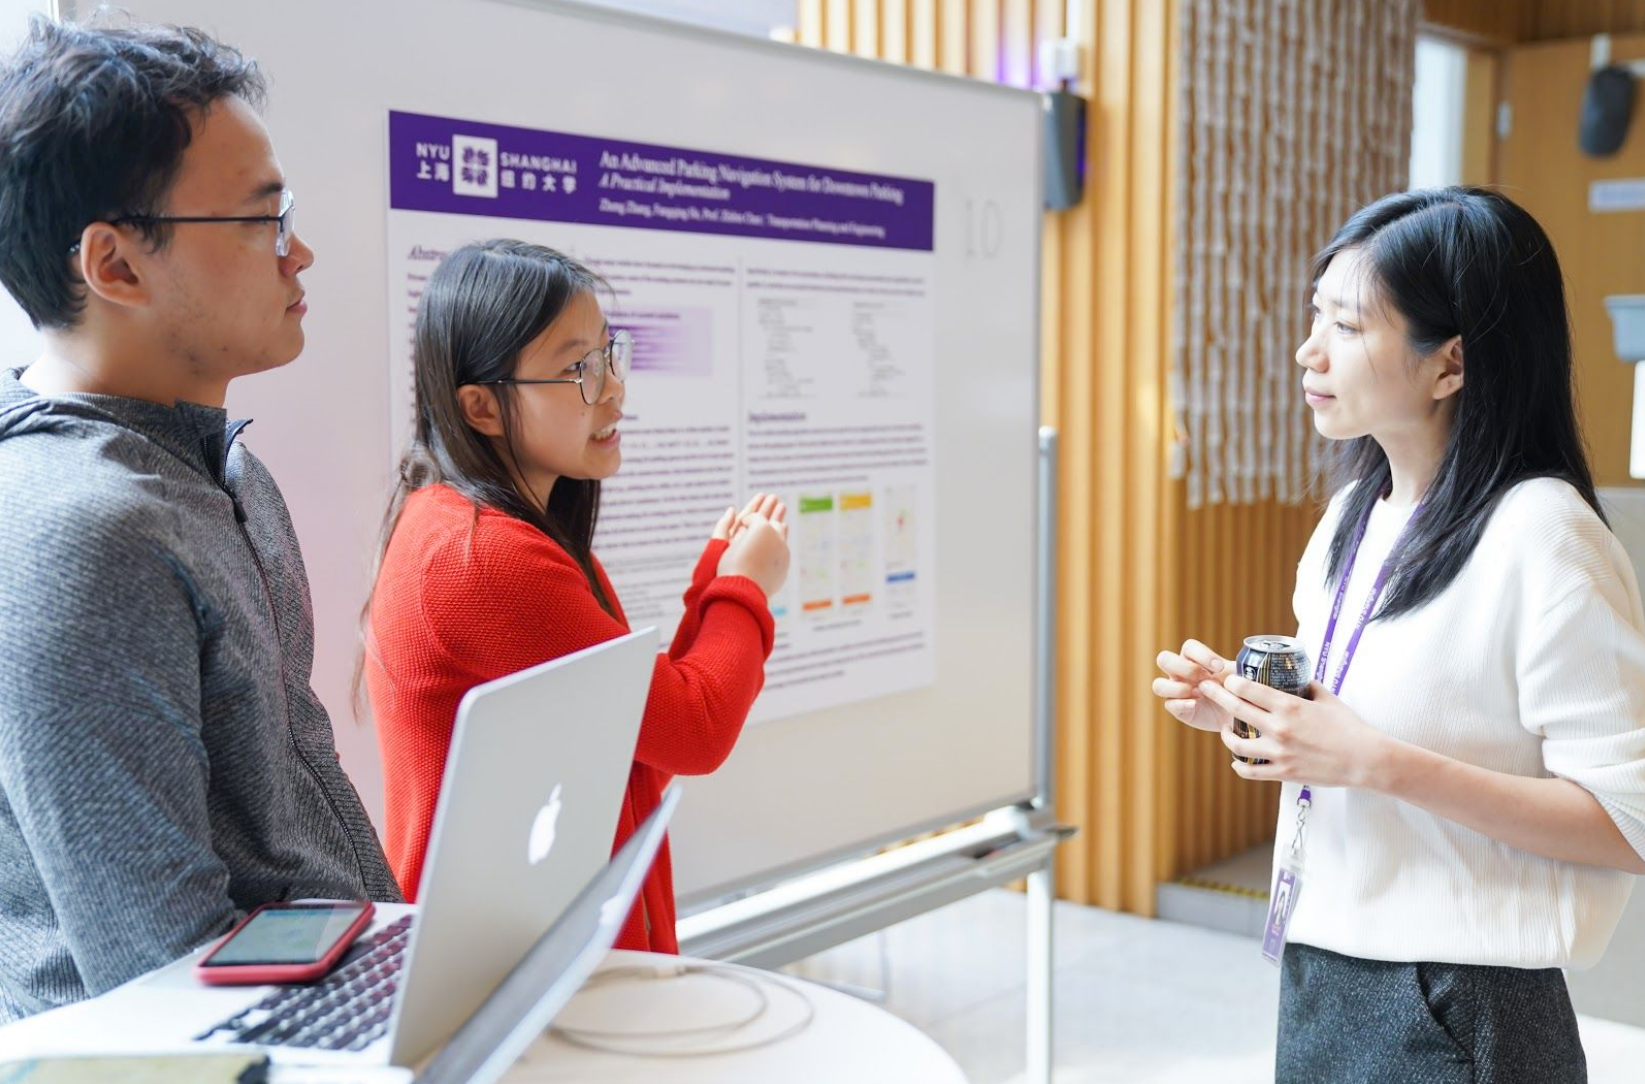 He Fangqing and Zhang Zheng presenting at the Undergraduate Research Expo and Poster Competition